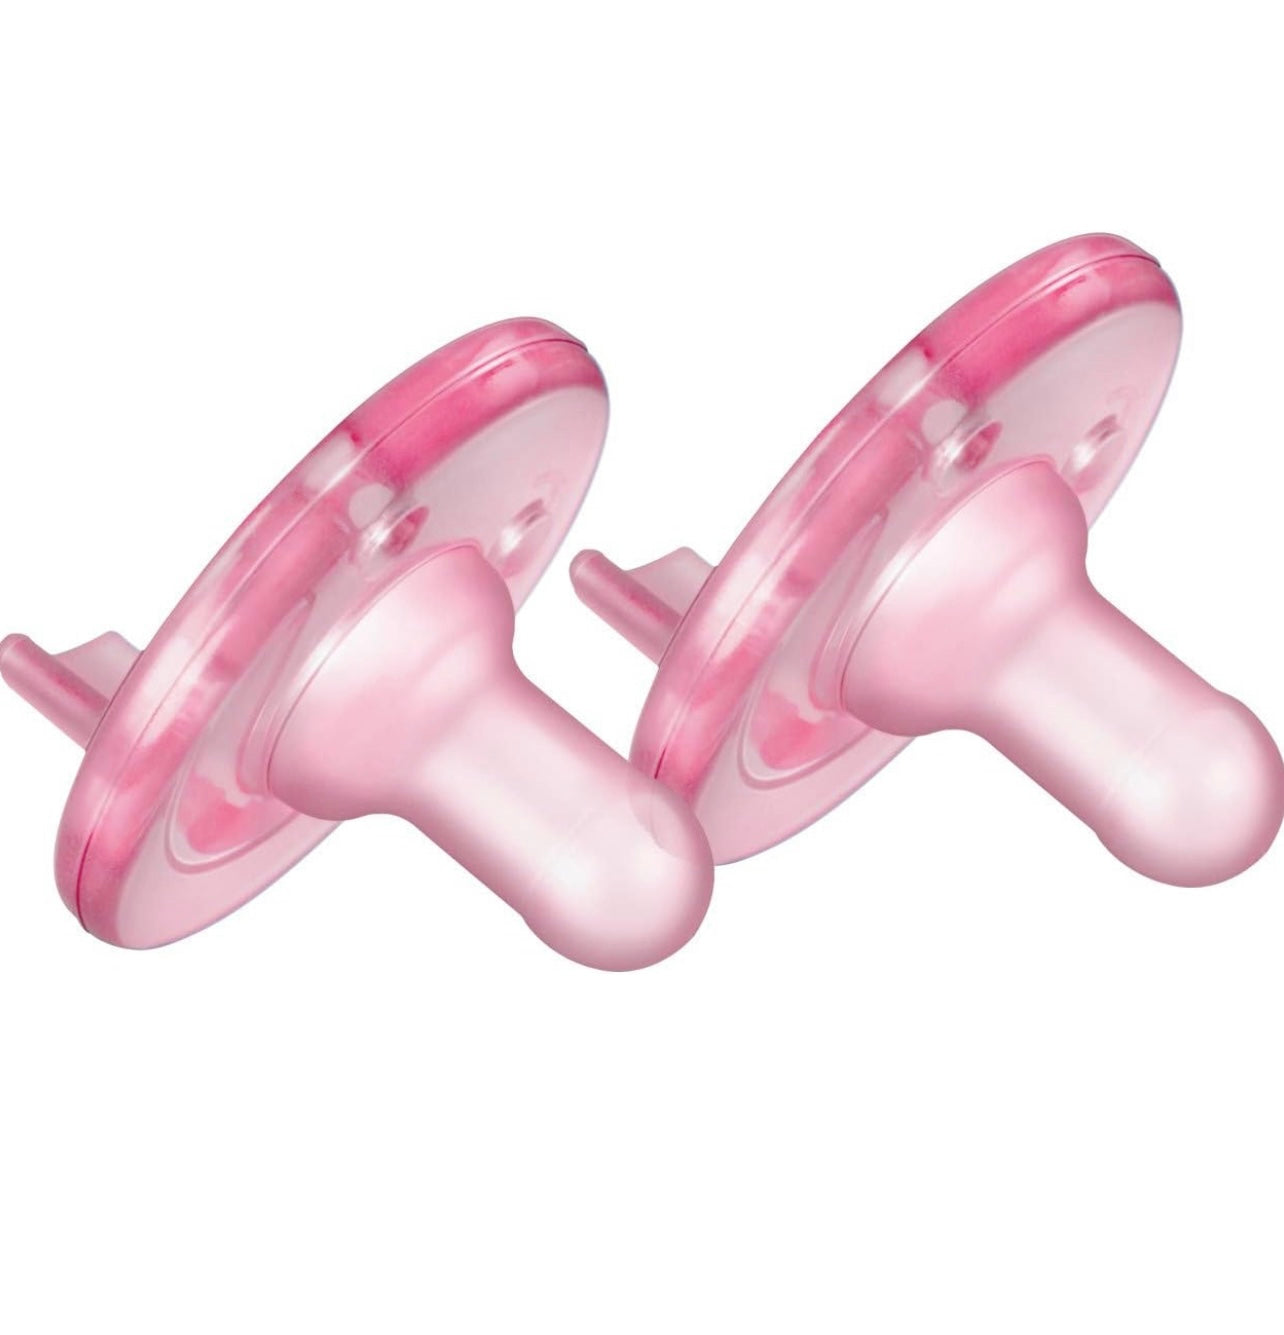 Philips Avent Super Soothie Pacifier, Pink, 3+ months, 2 Pack